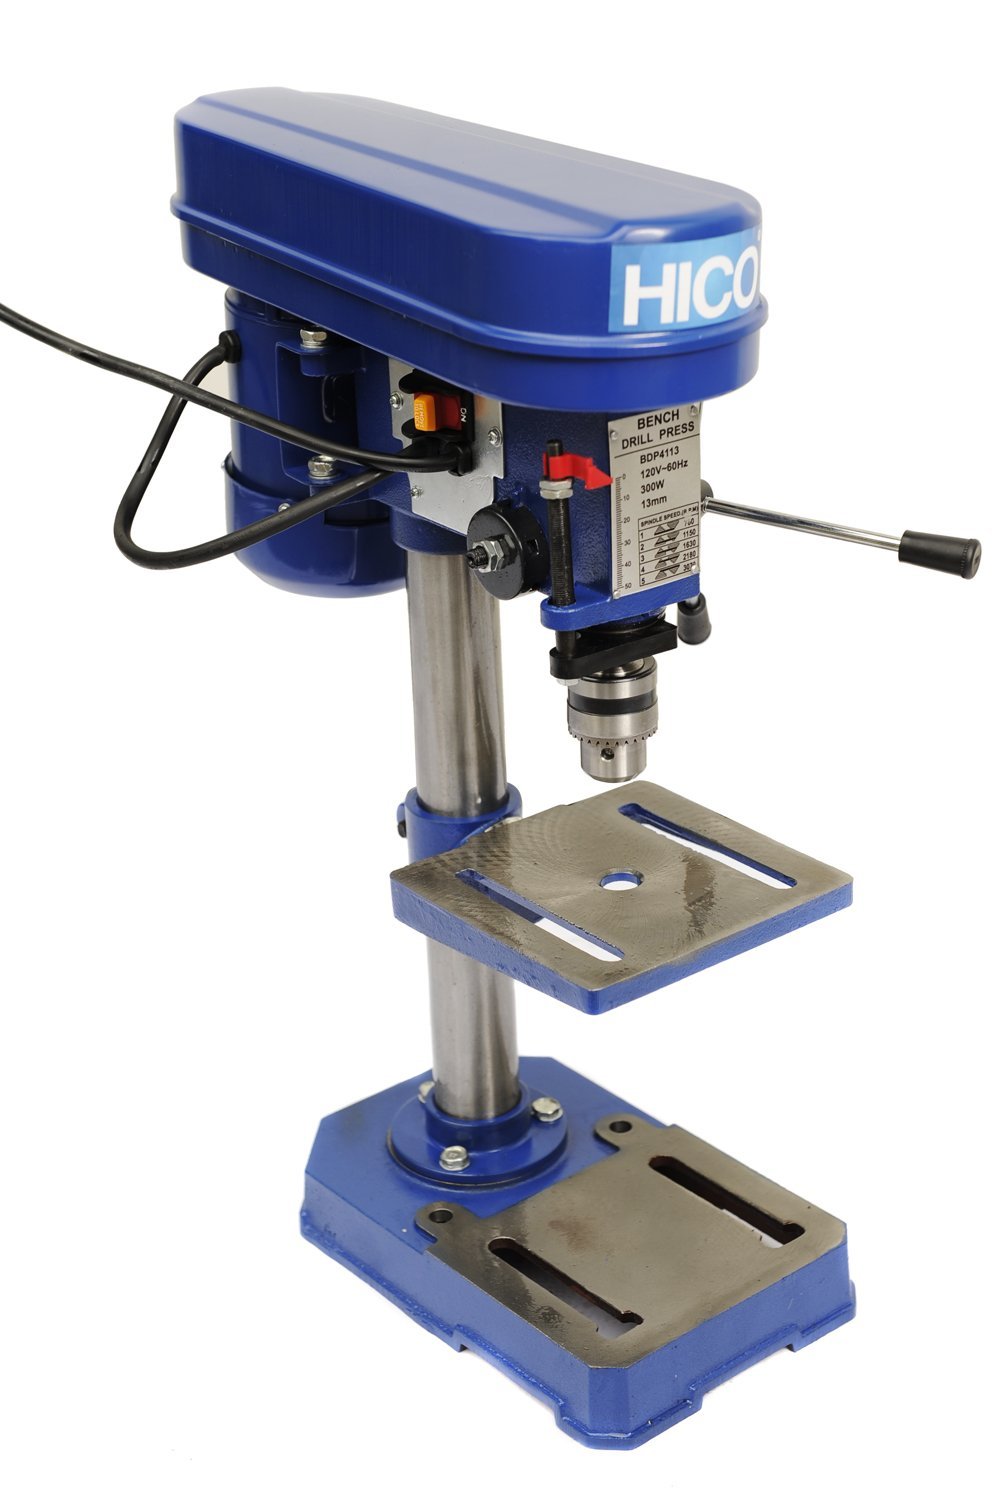 HICO-DP4113 8-Inch Bench Top Drill Press 5 Speed